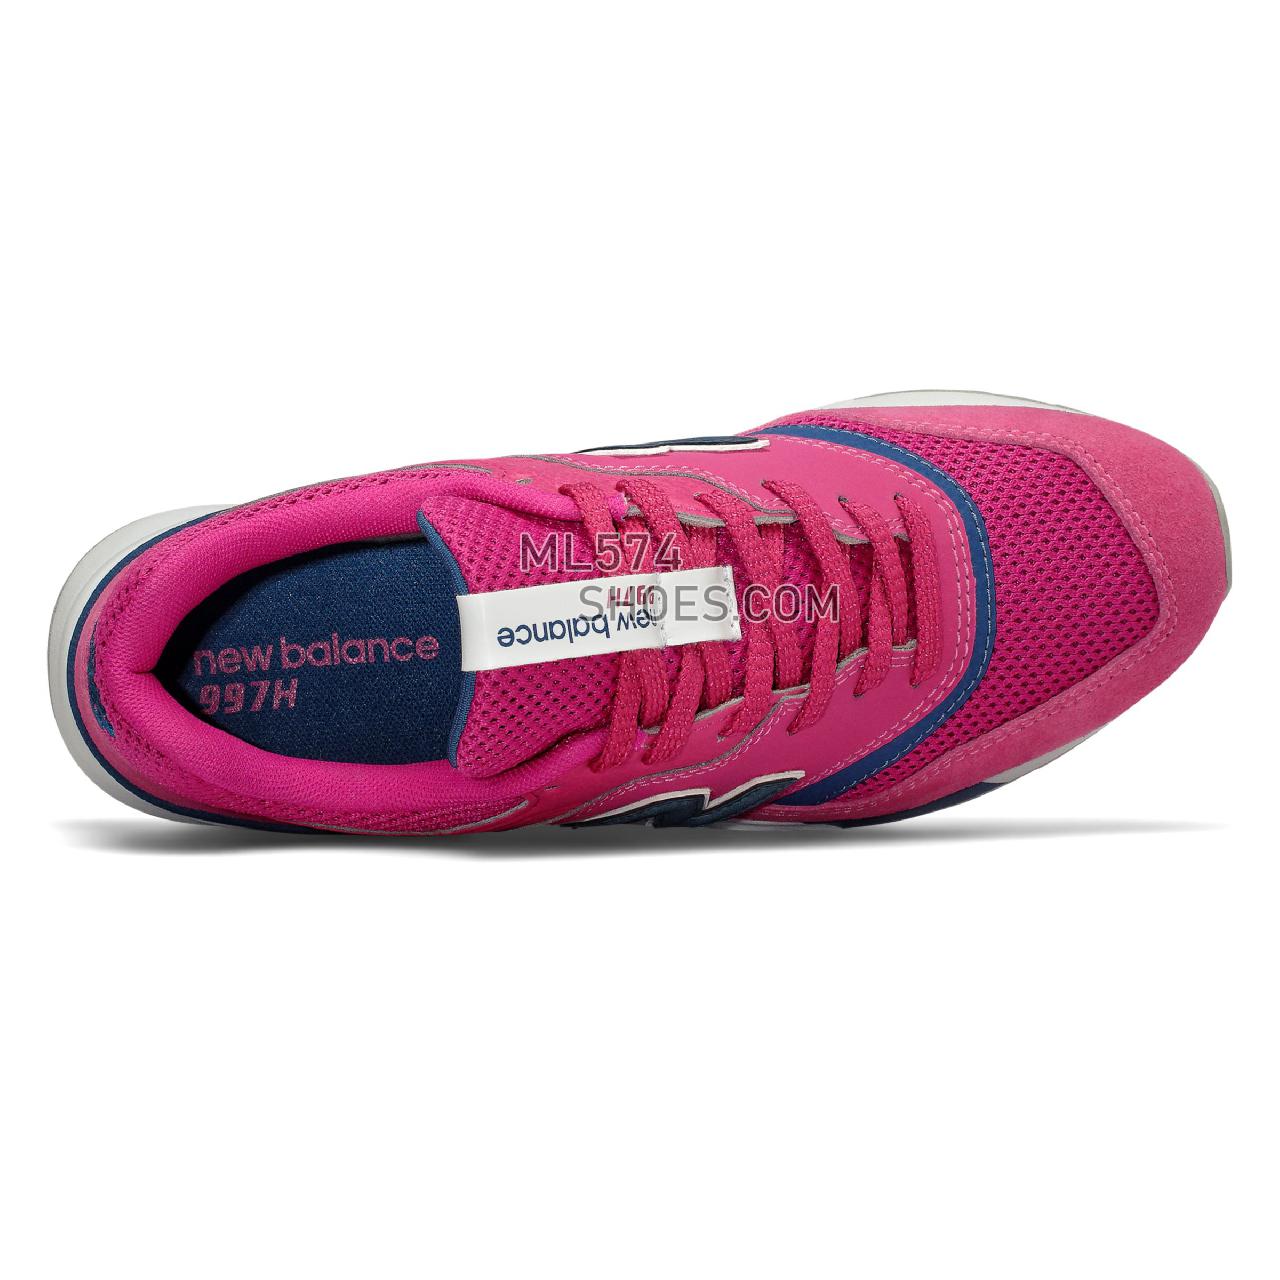 New Balance 997H - Women's Classic Sneakers - Pink with Blue - CW997HNZ